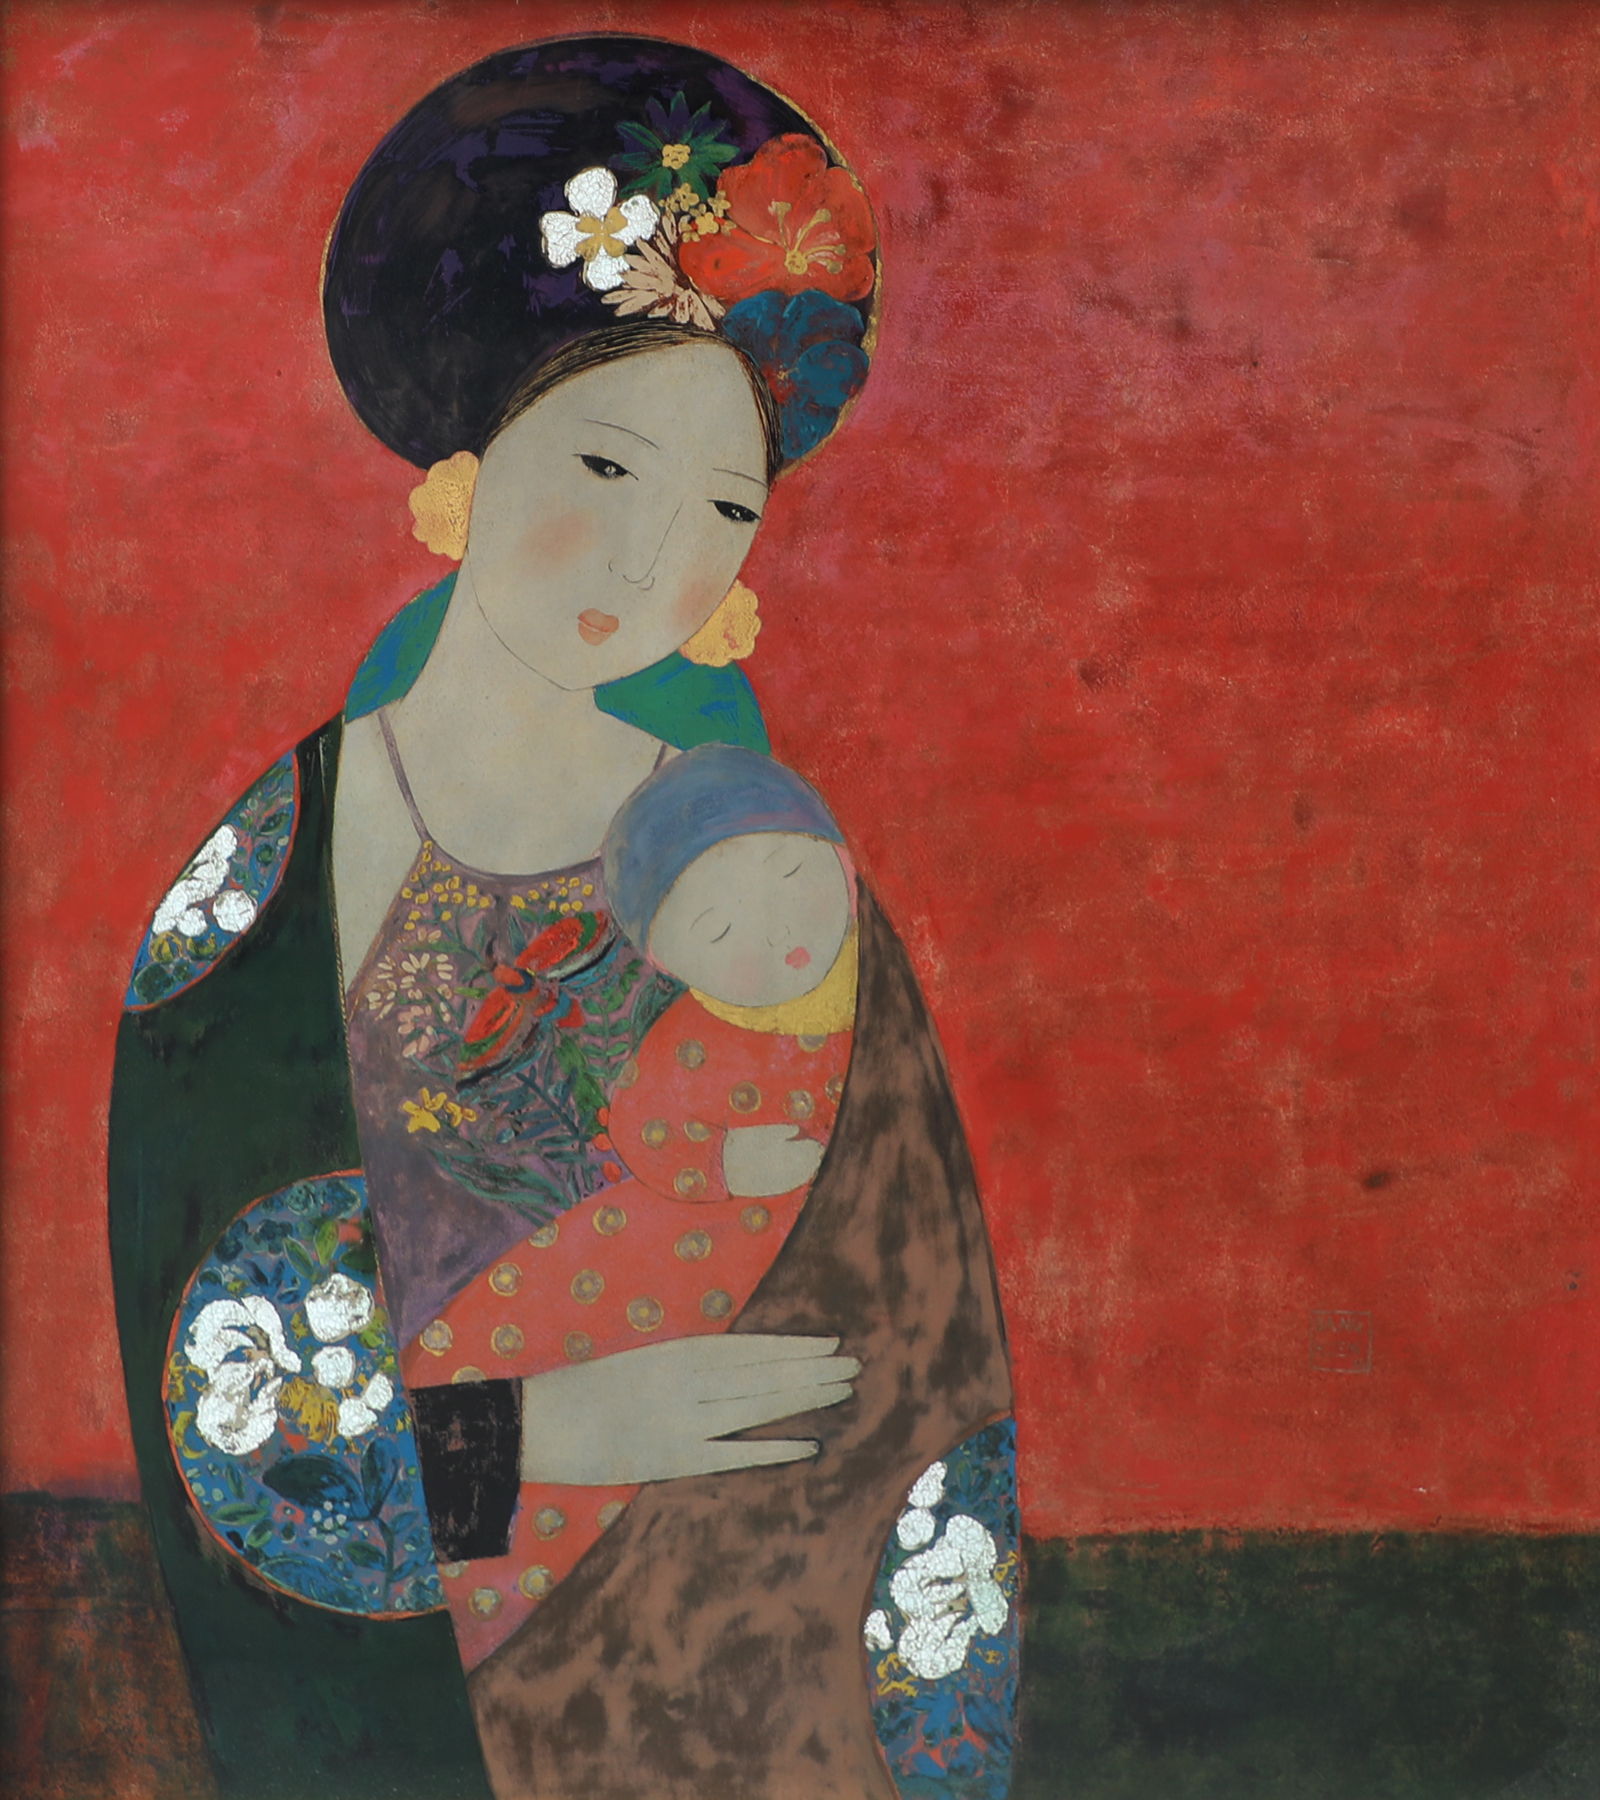 Mother’s Little Sun I - Vietnamese Lacquer Painting by Artist Dang Hien